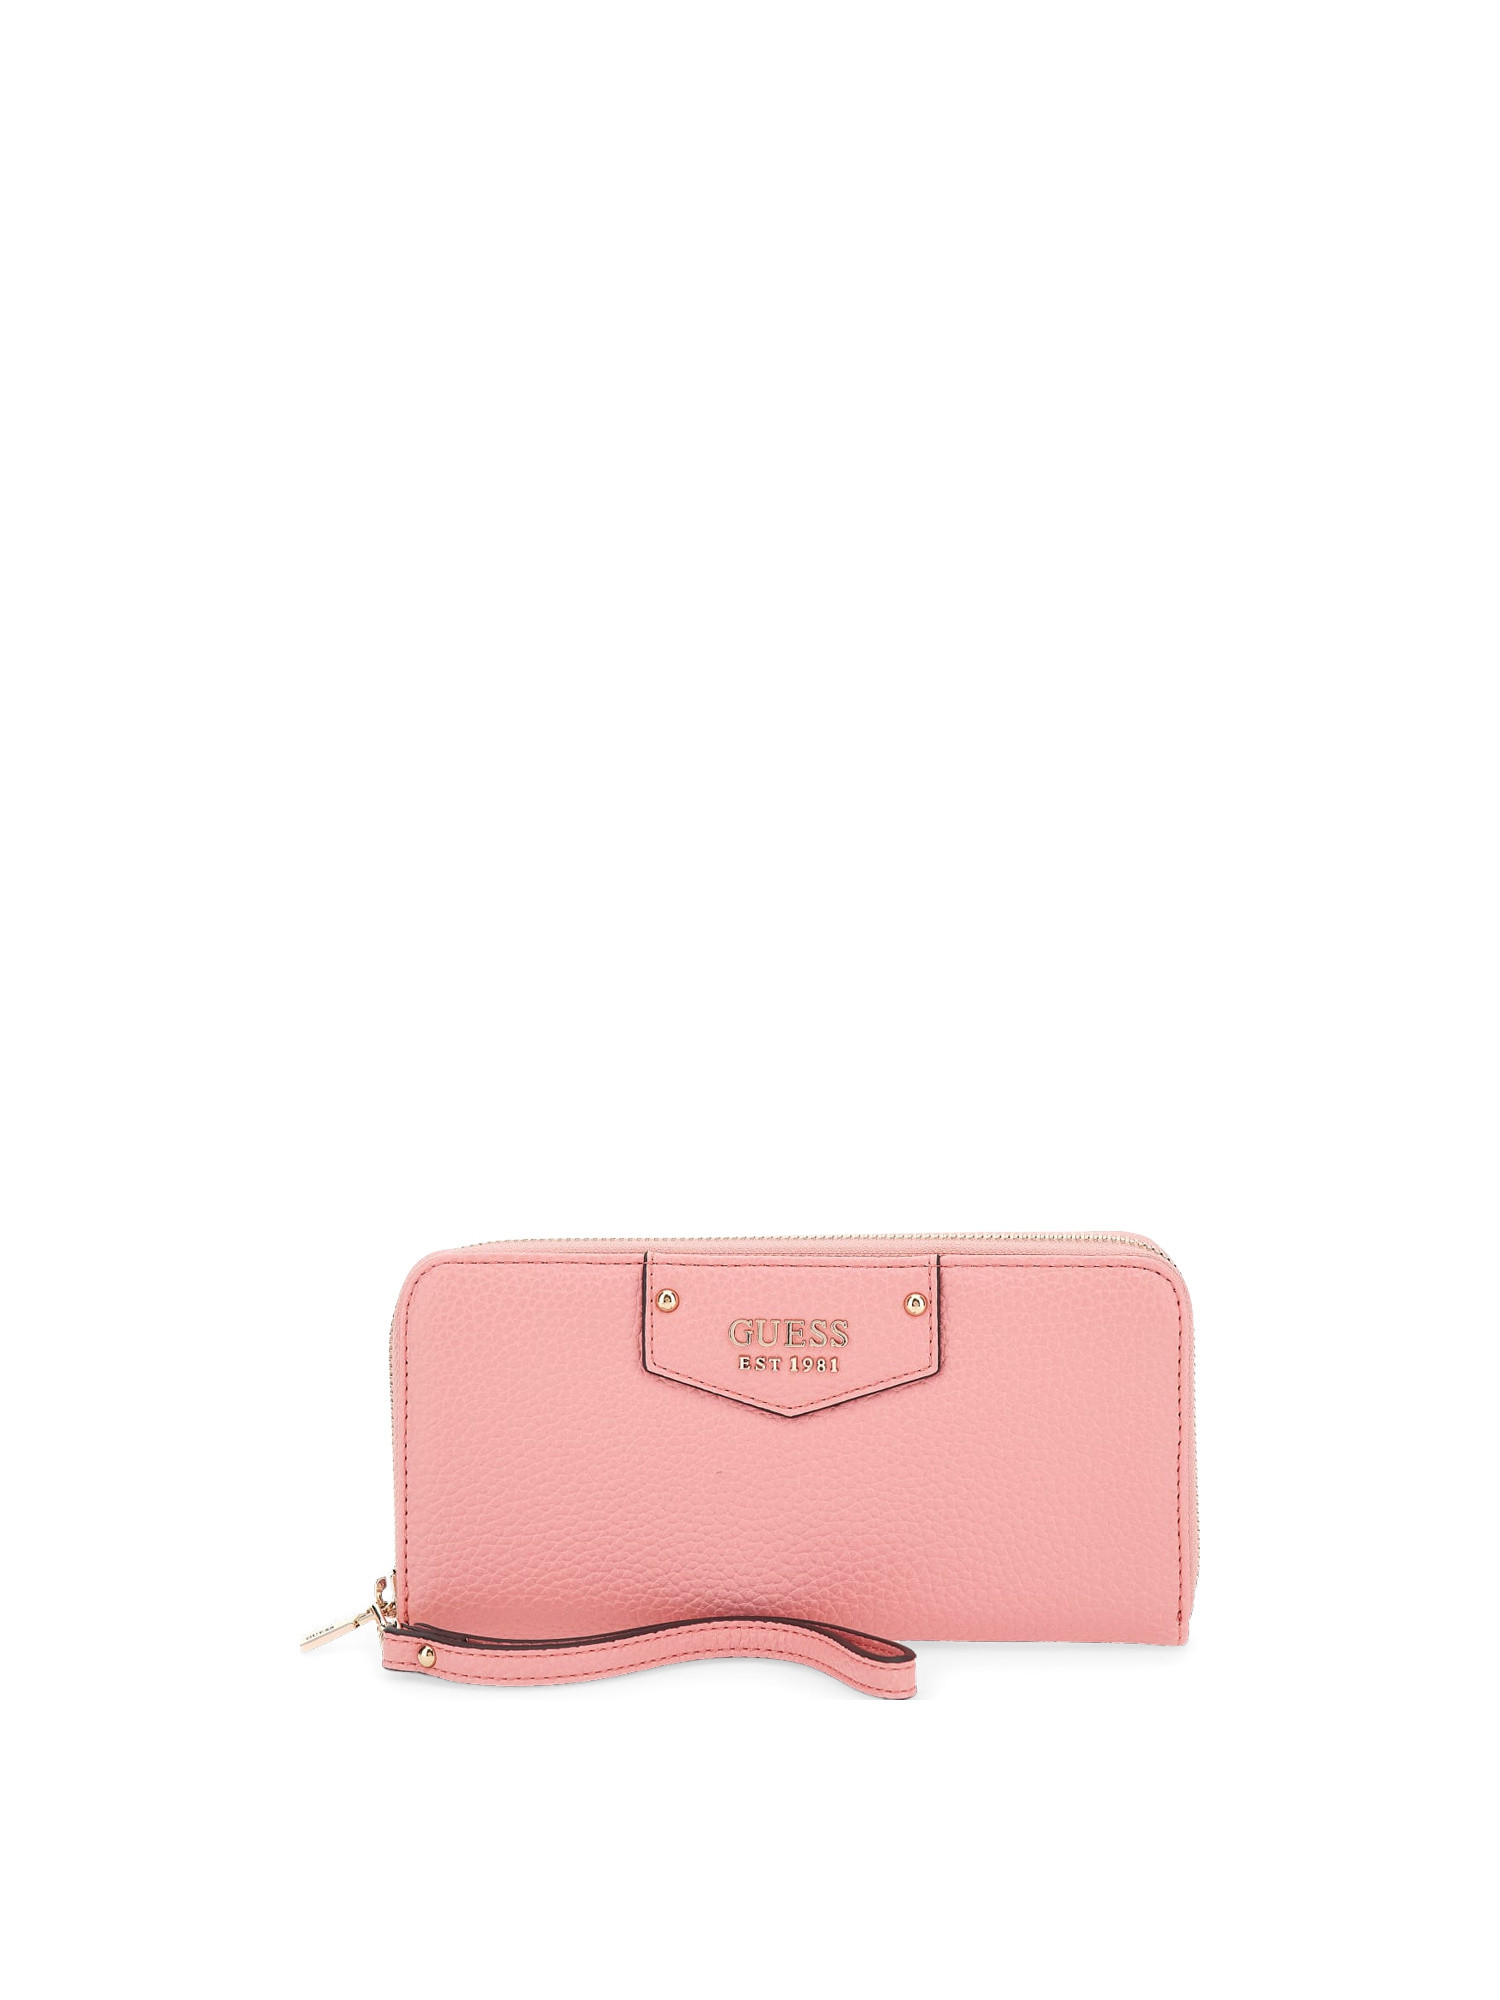 Guess - Brenton eco maxi wallet, Pink, large image number 0